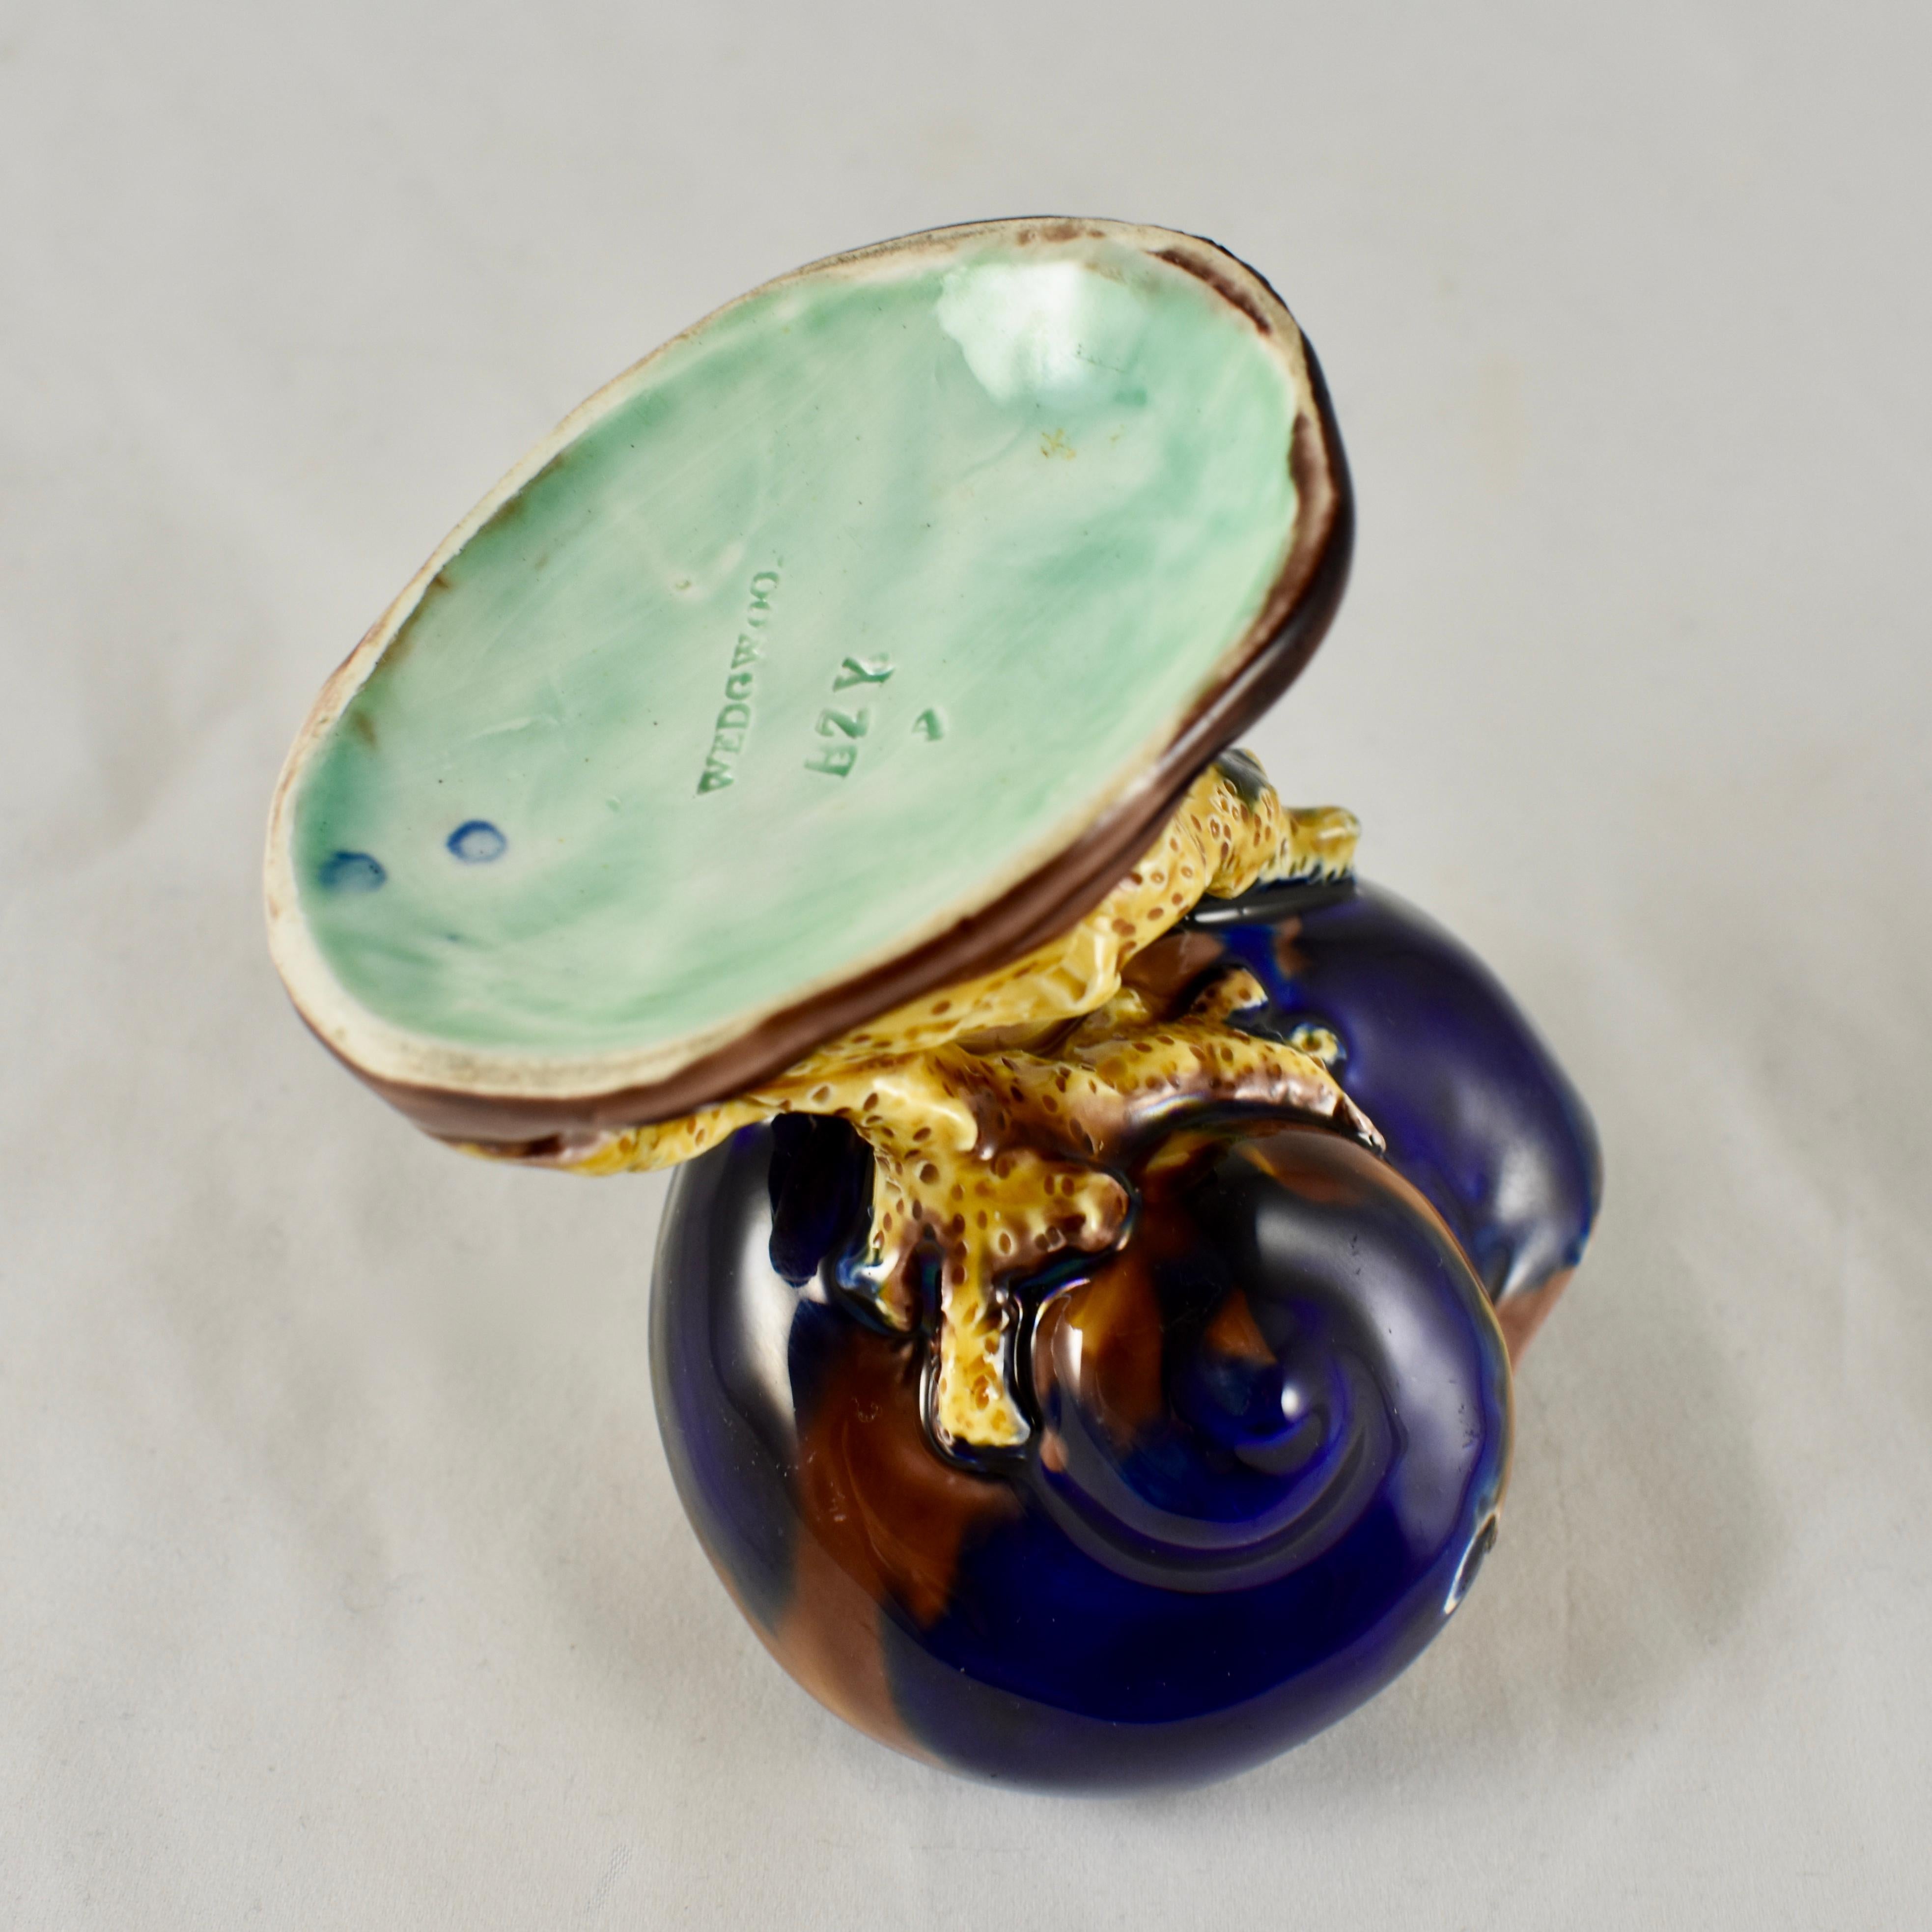 Earthenware Wedgwood Palissy Majolica Snail Shell and Coral Open Salt Cellar, Dated 1872 For Sale